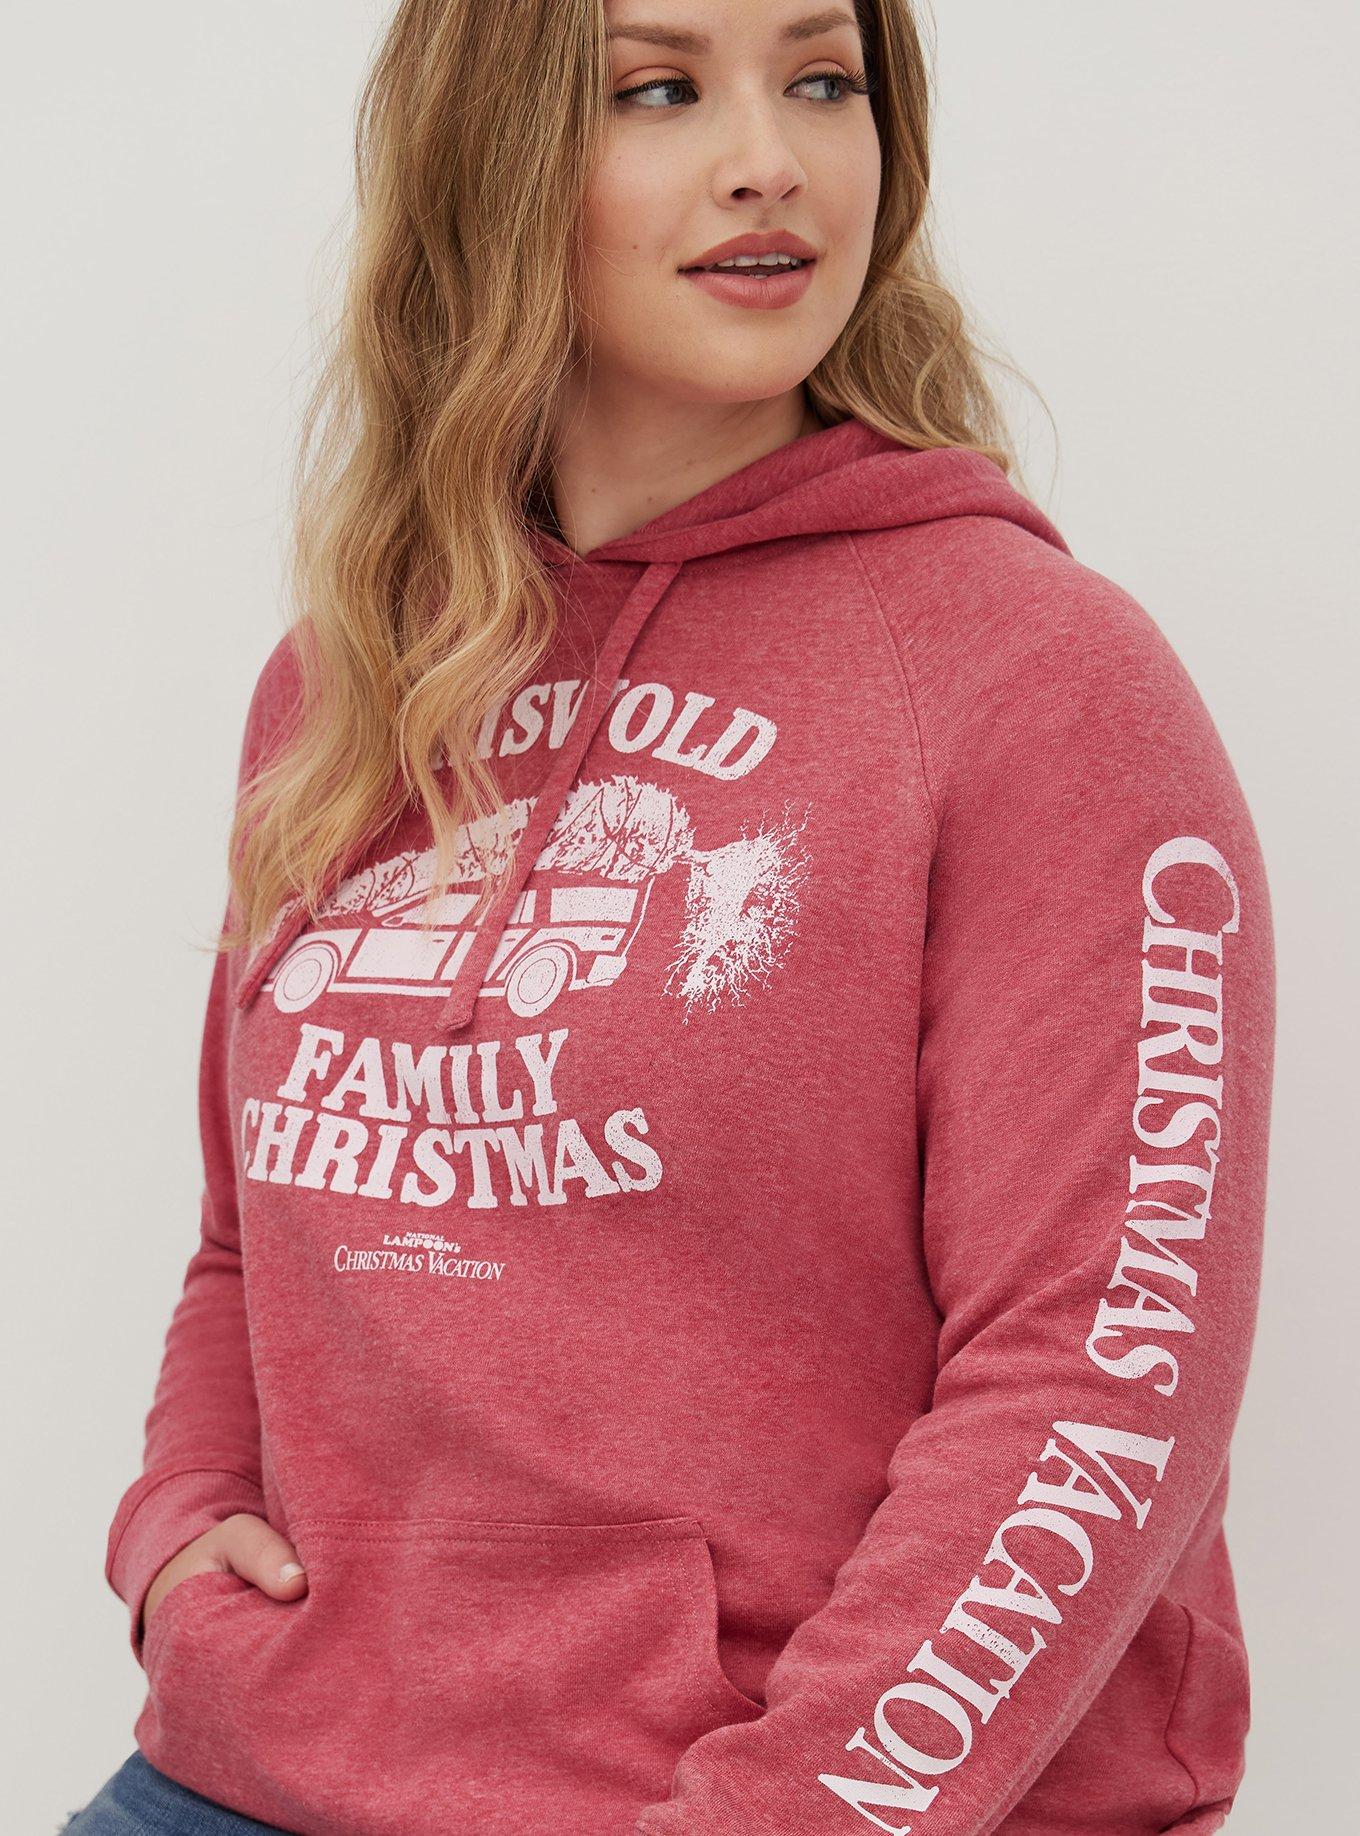 Plus - National Lampoon's Vacation Pullover Hoodie - Cozy Fleece Family Christmas Red